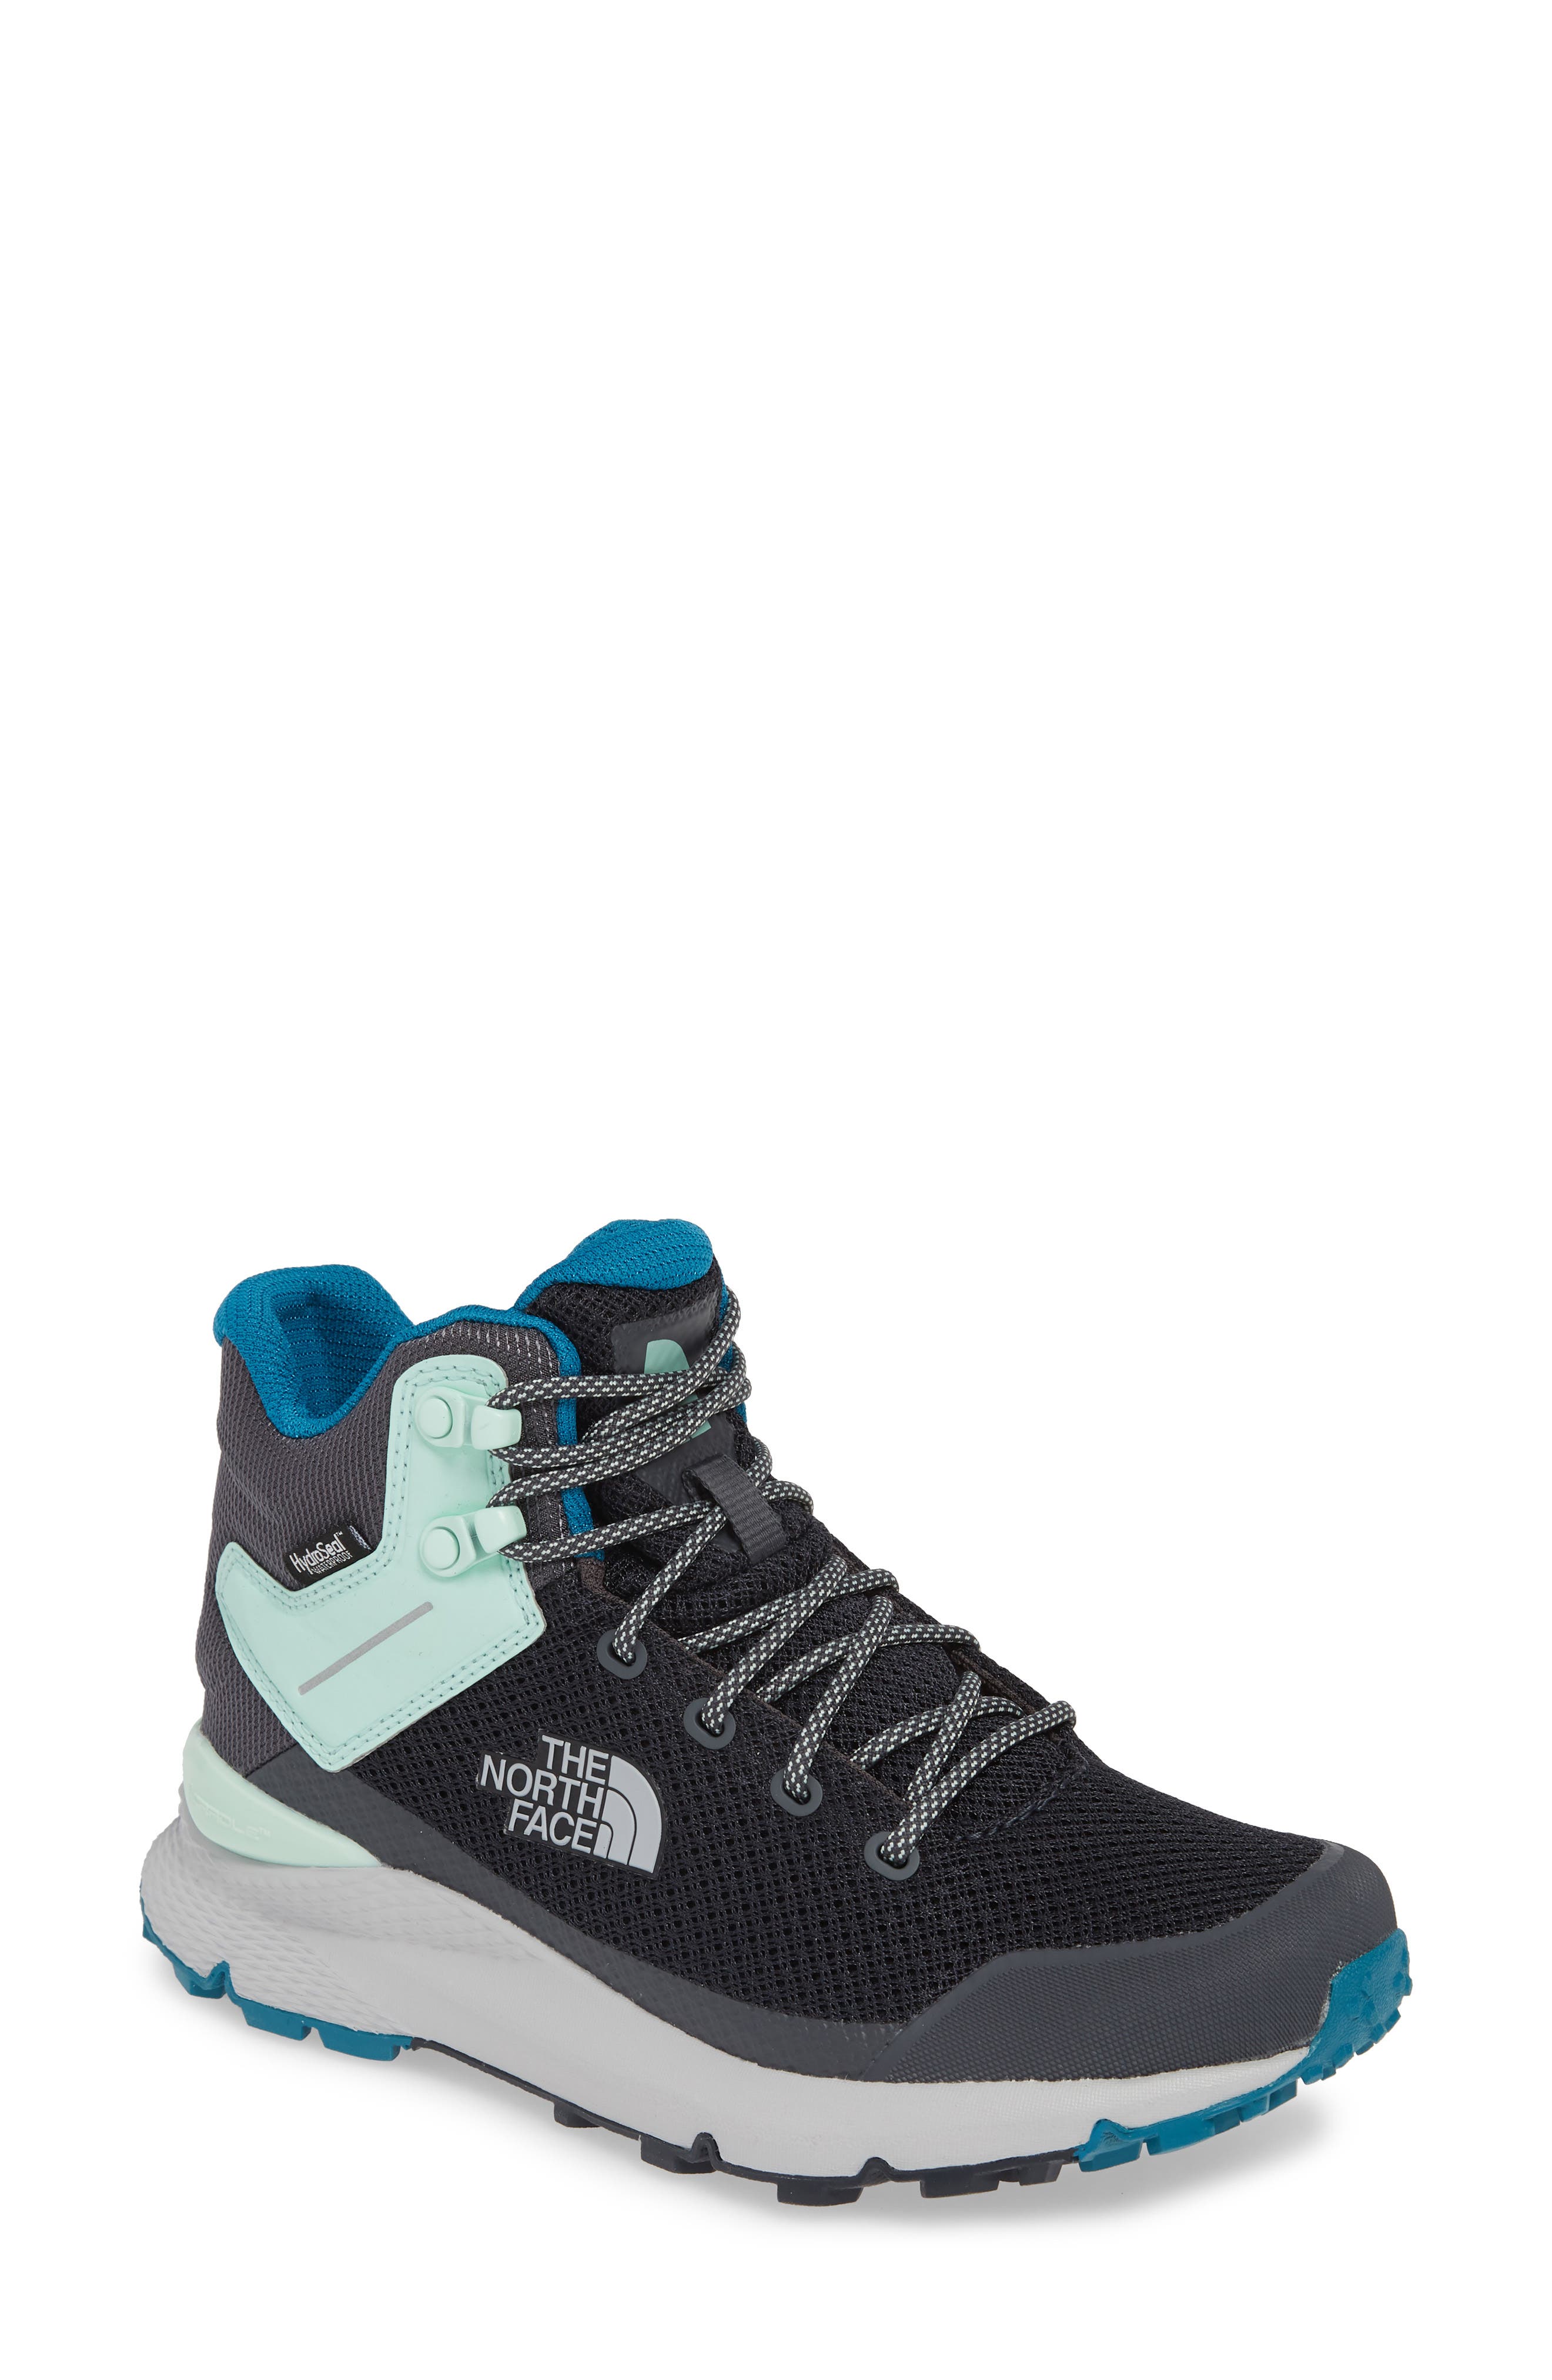 The North Face Vals Waterproof Mid 